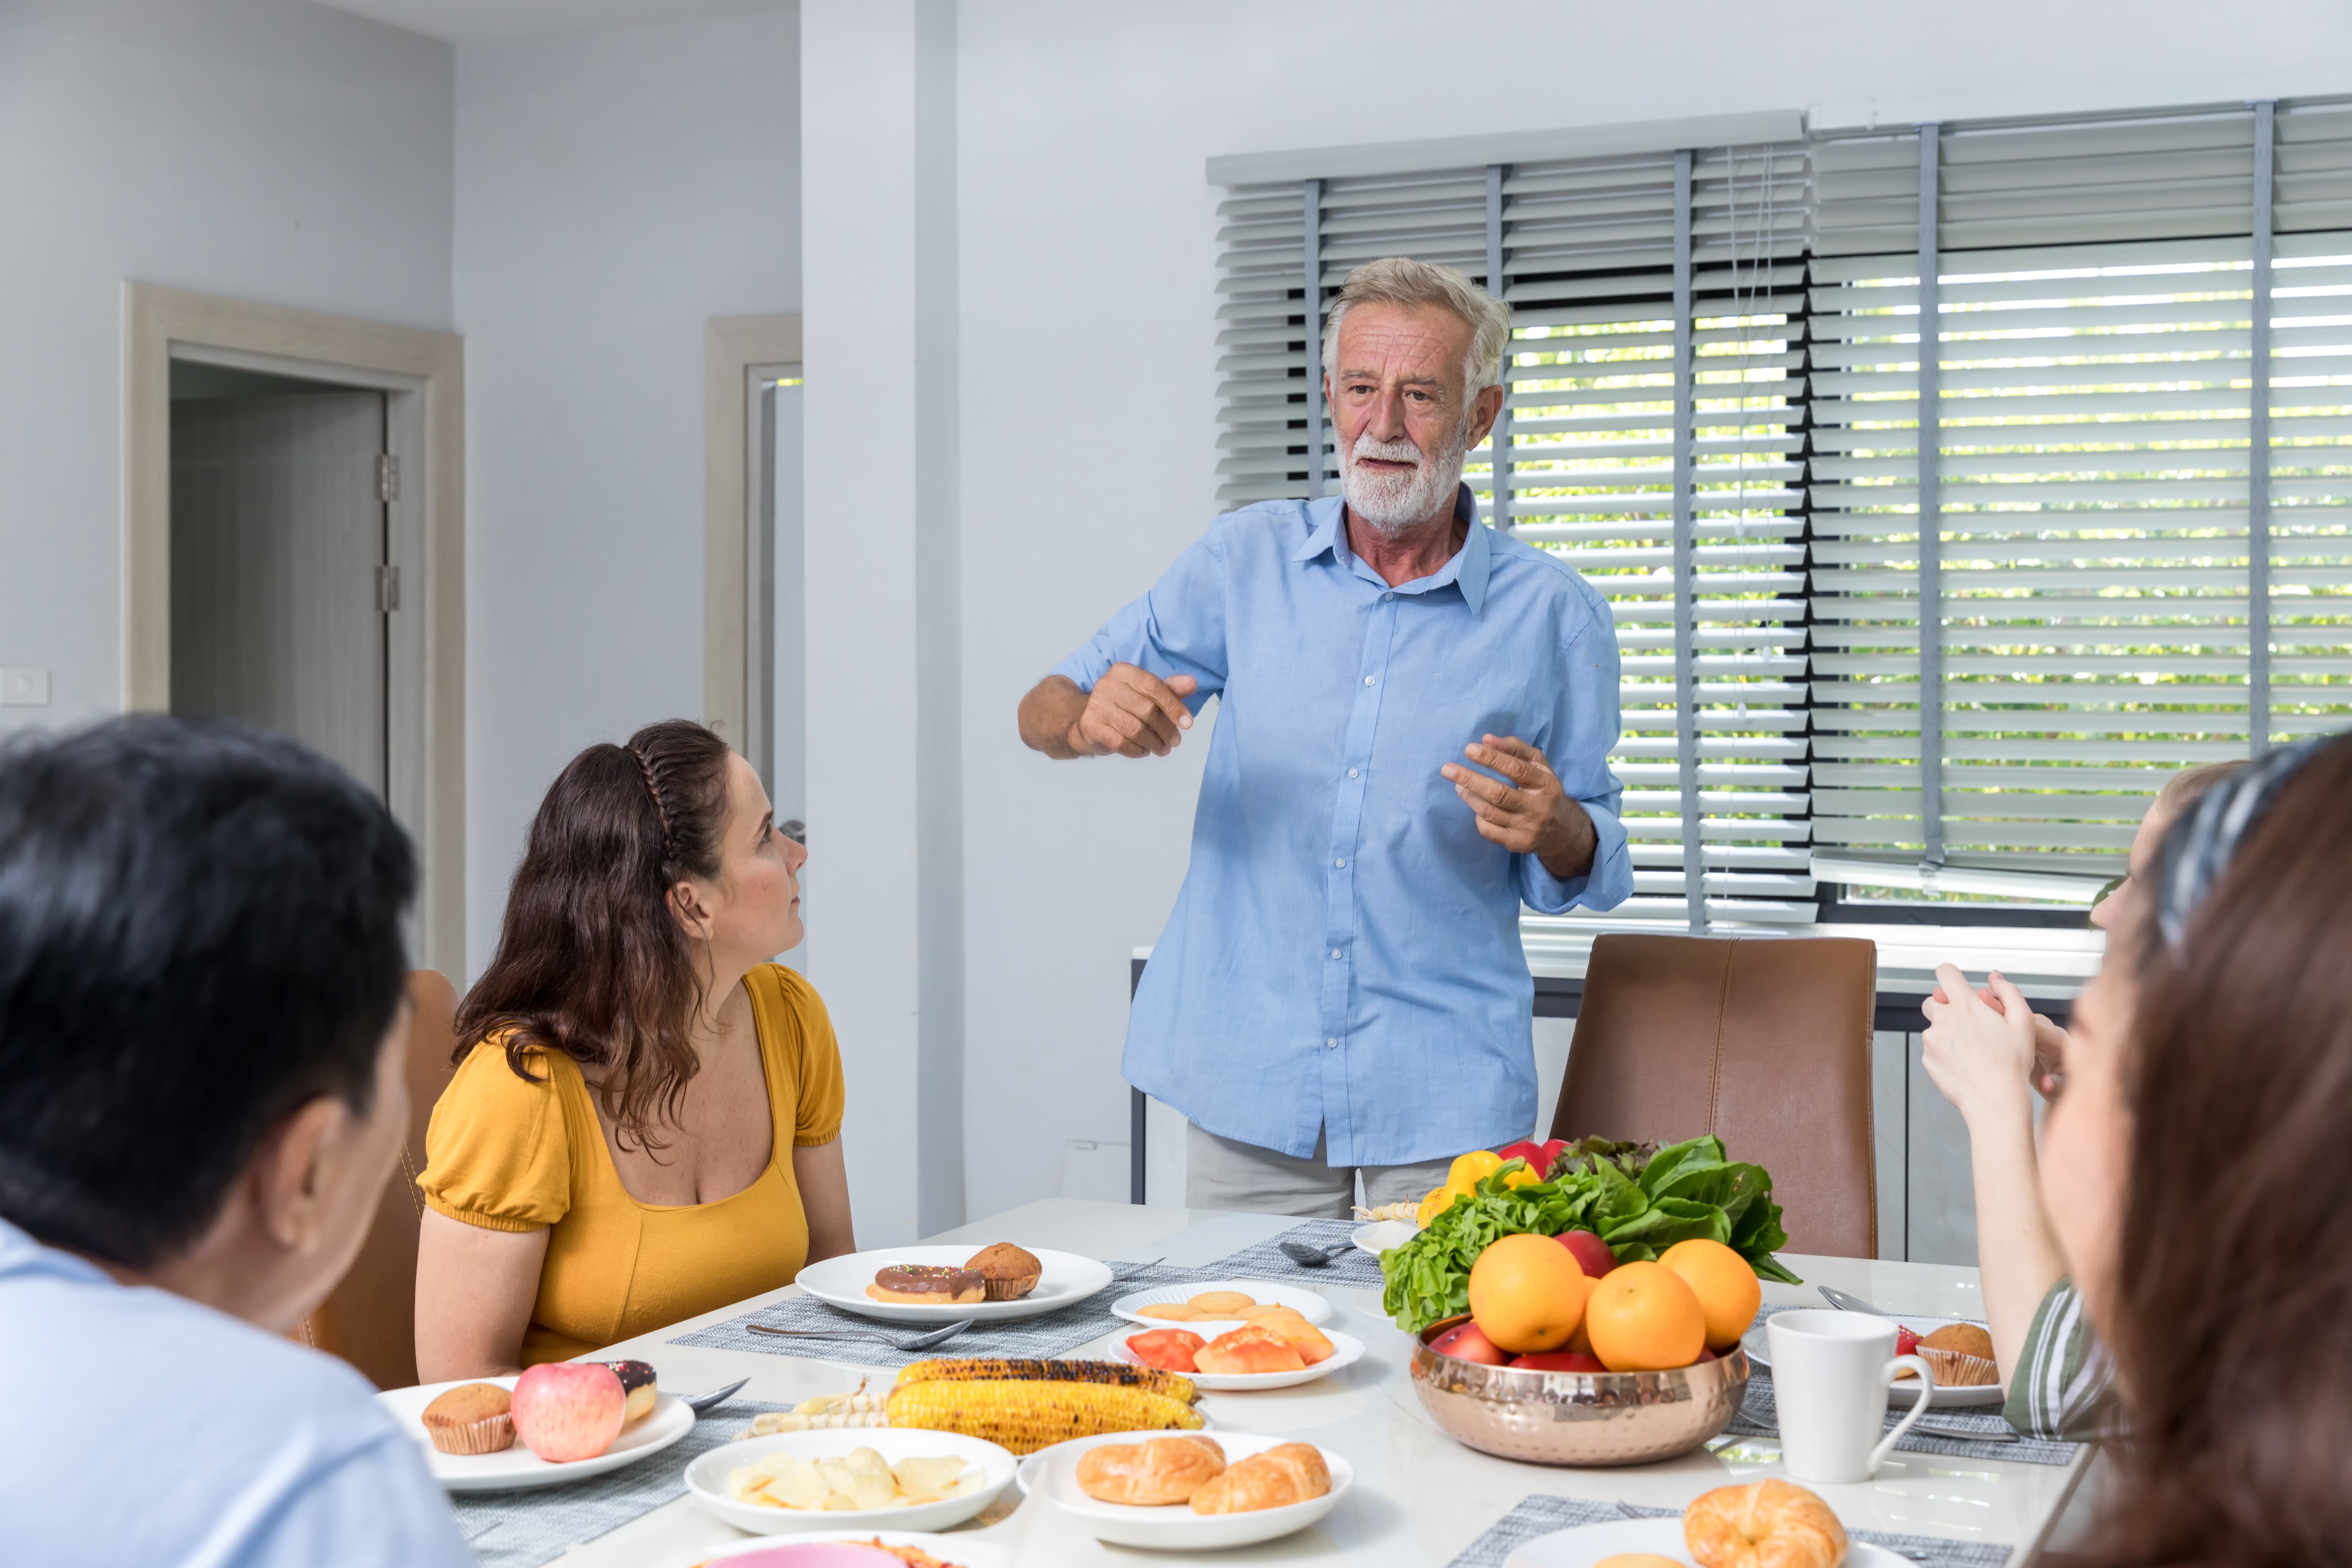 An elderly man speaking to his family members at the table | Source: Shutterstock